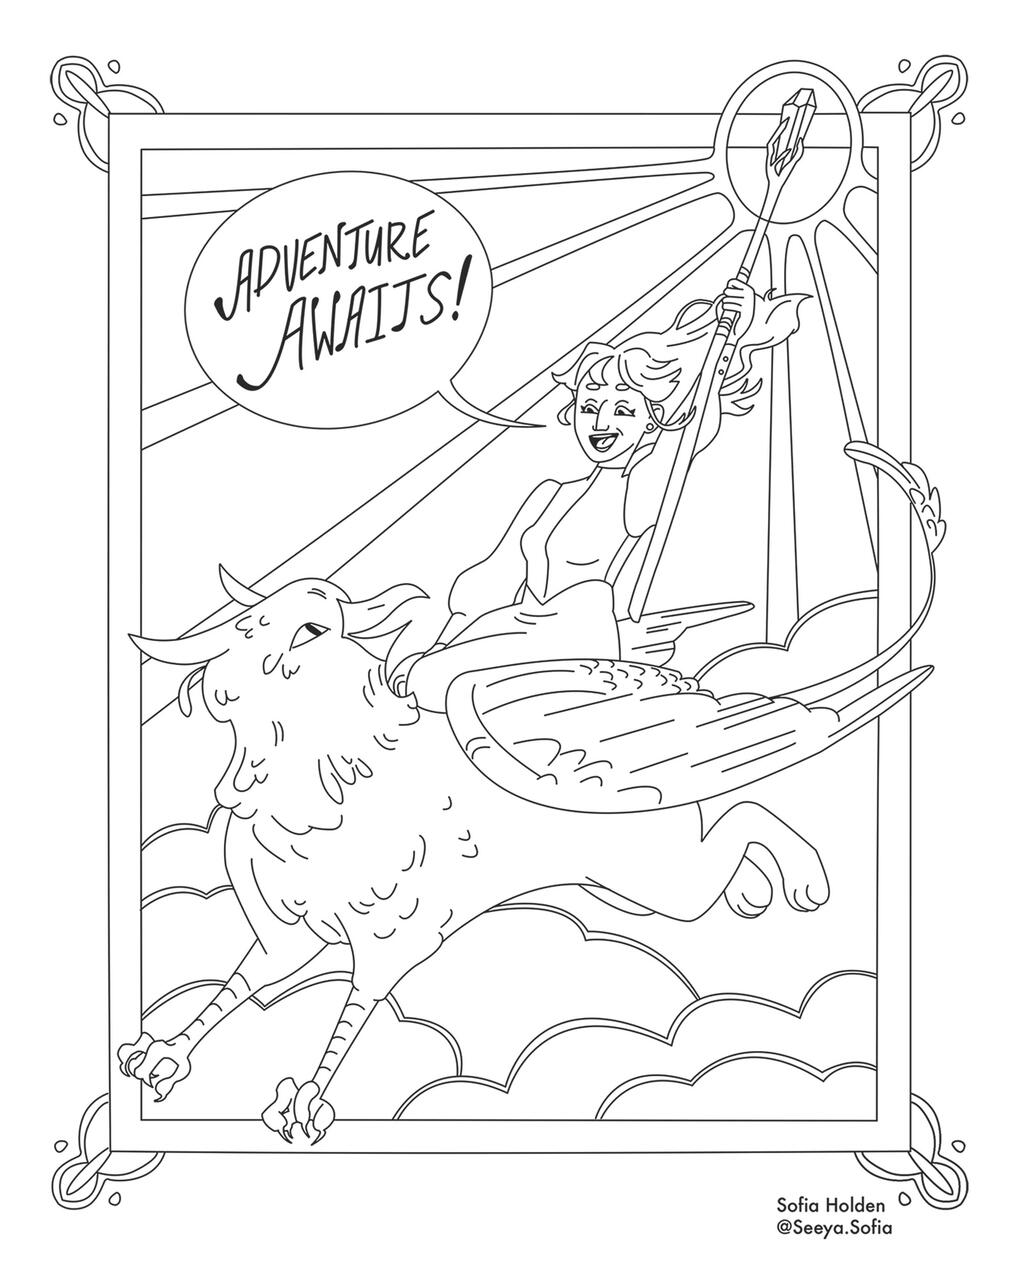 Coloring page of a person riding a hippogriff